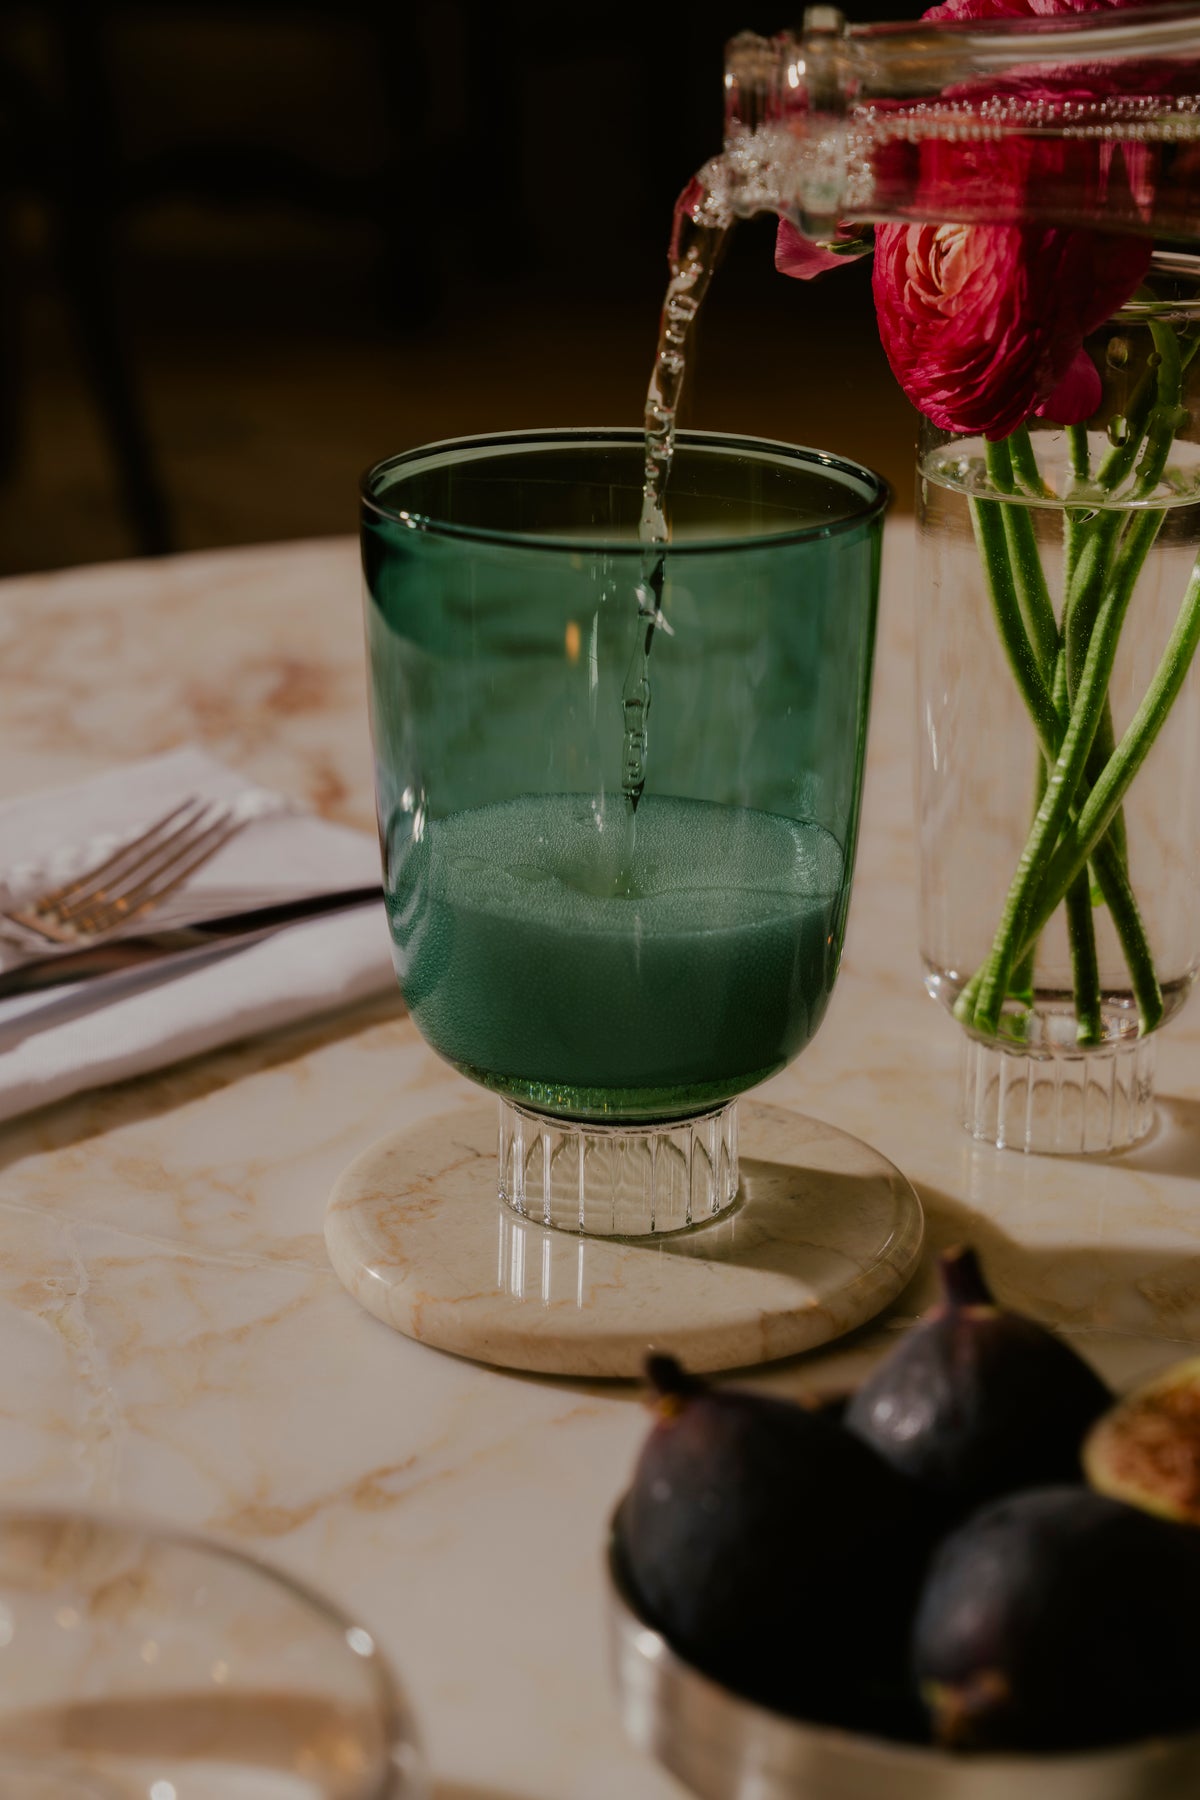 An emerald green stemless wine glass with a ribbed base, set on a marble table. The glass, part of a sophisticated table setting, is accompanied by a vase of pink ranunculus flowers and figs, capturing the essence of elegant dining.